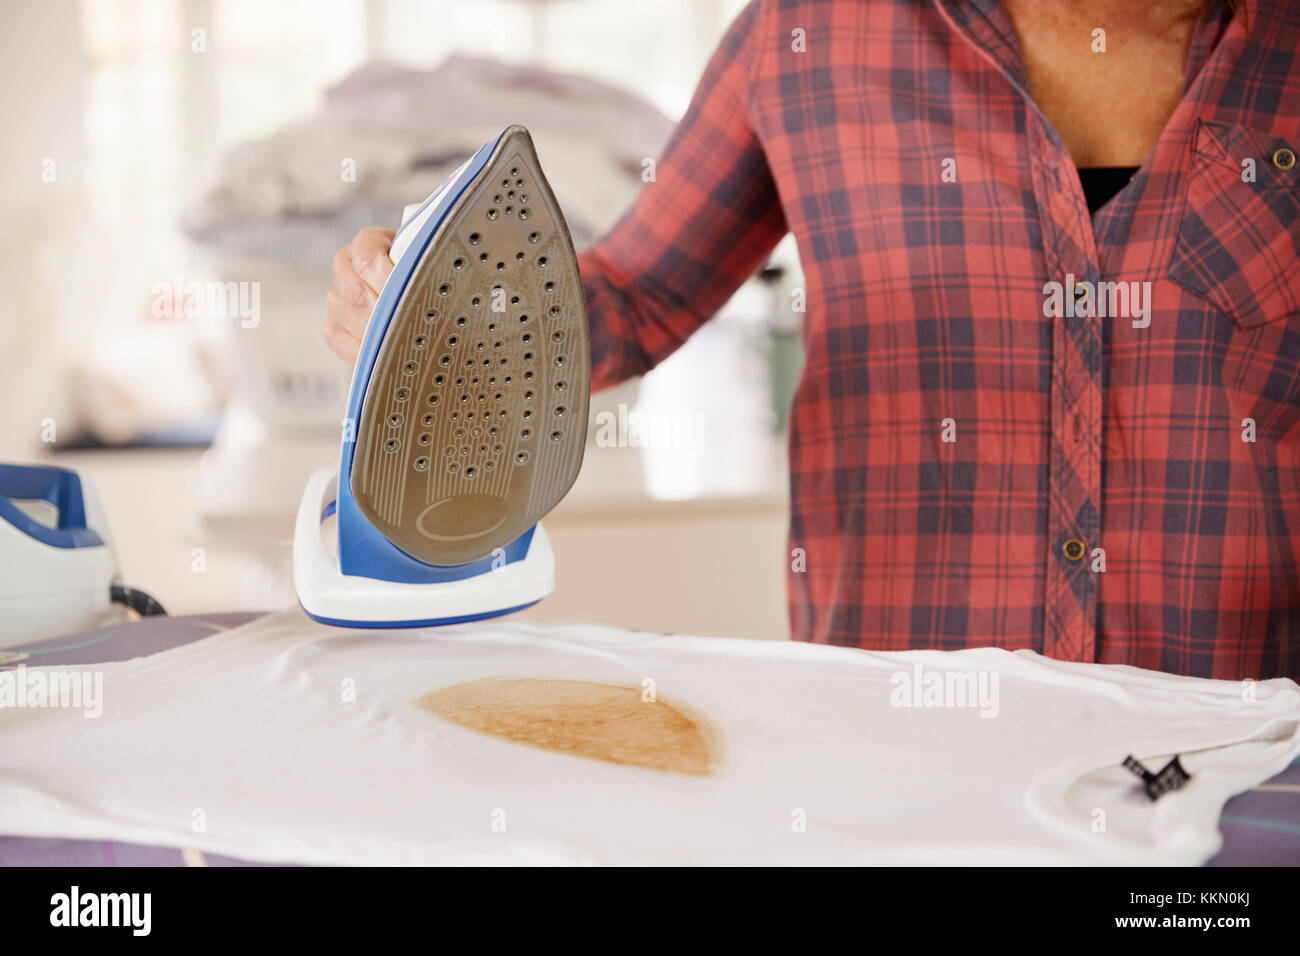 Detail of woman holding iron over burnt, damaged t shirt Stock Photo